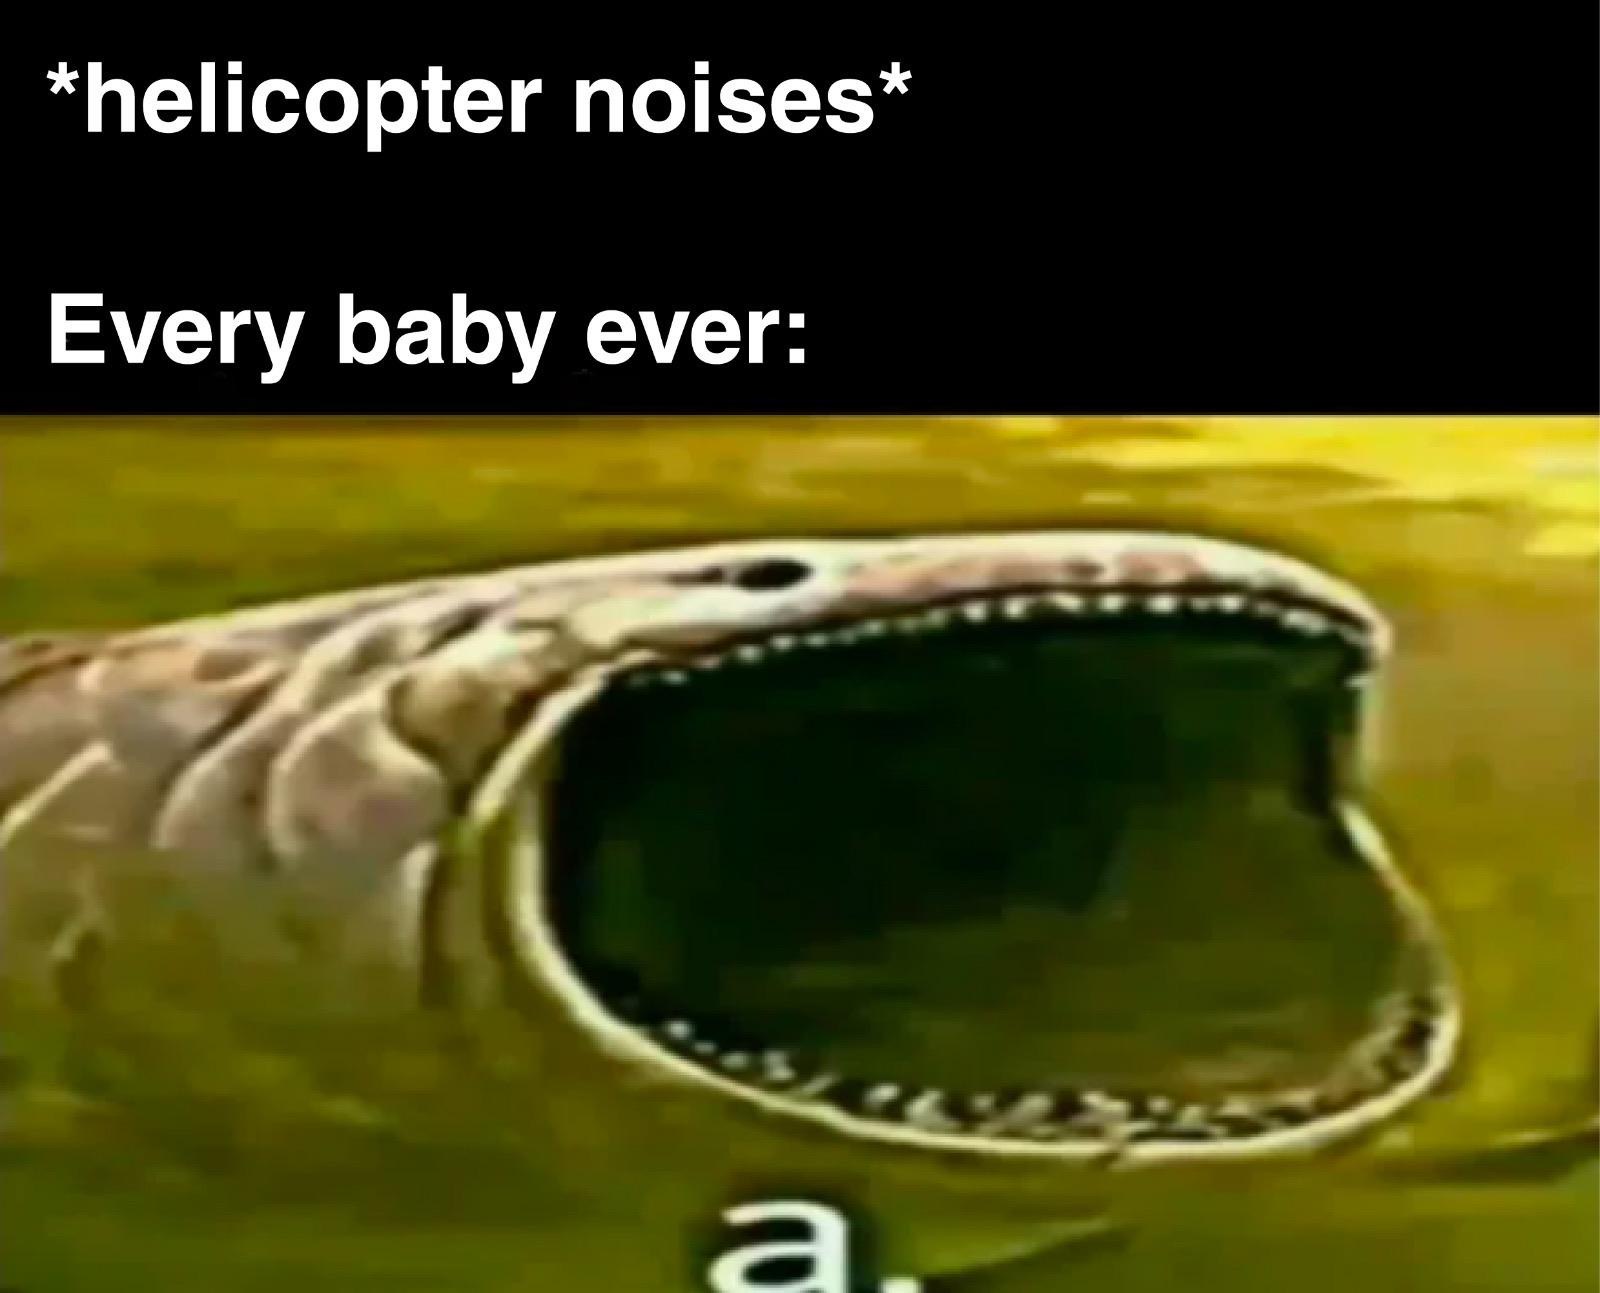 fauna - helicopter noises Every baby ever a.